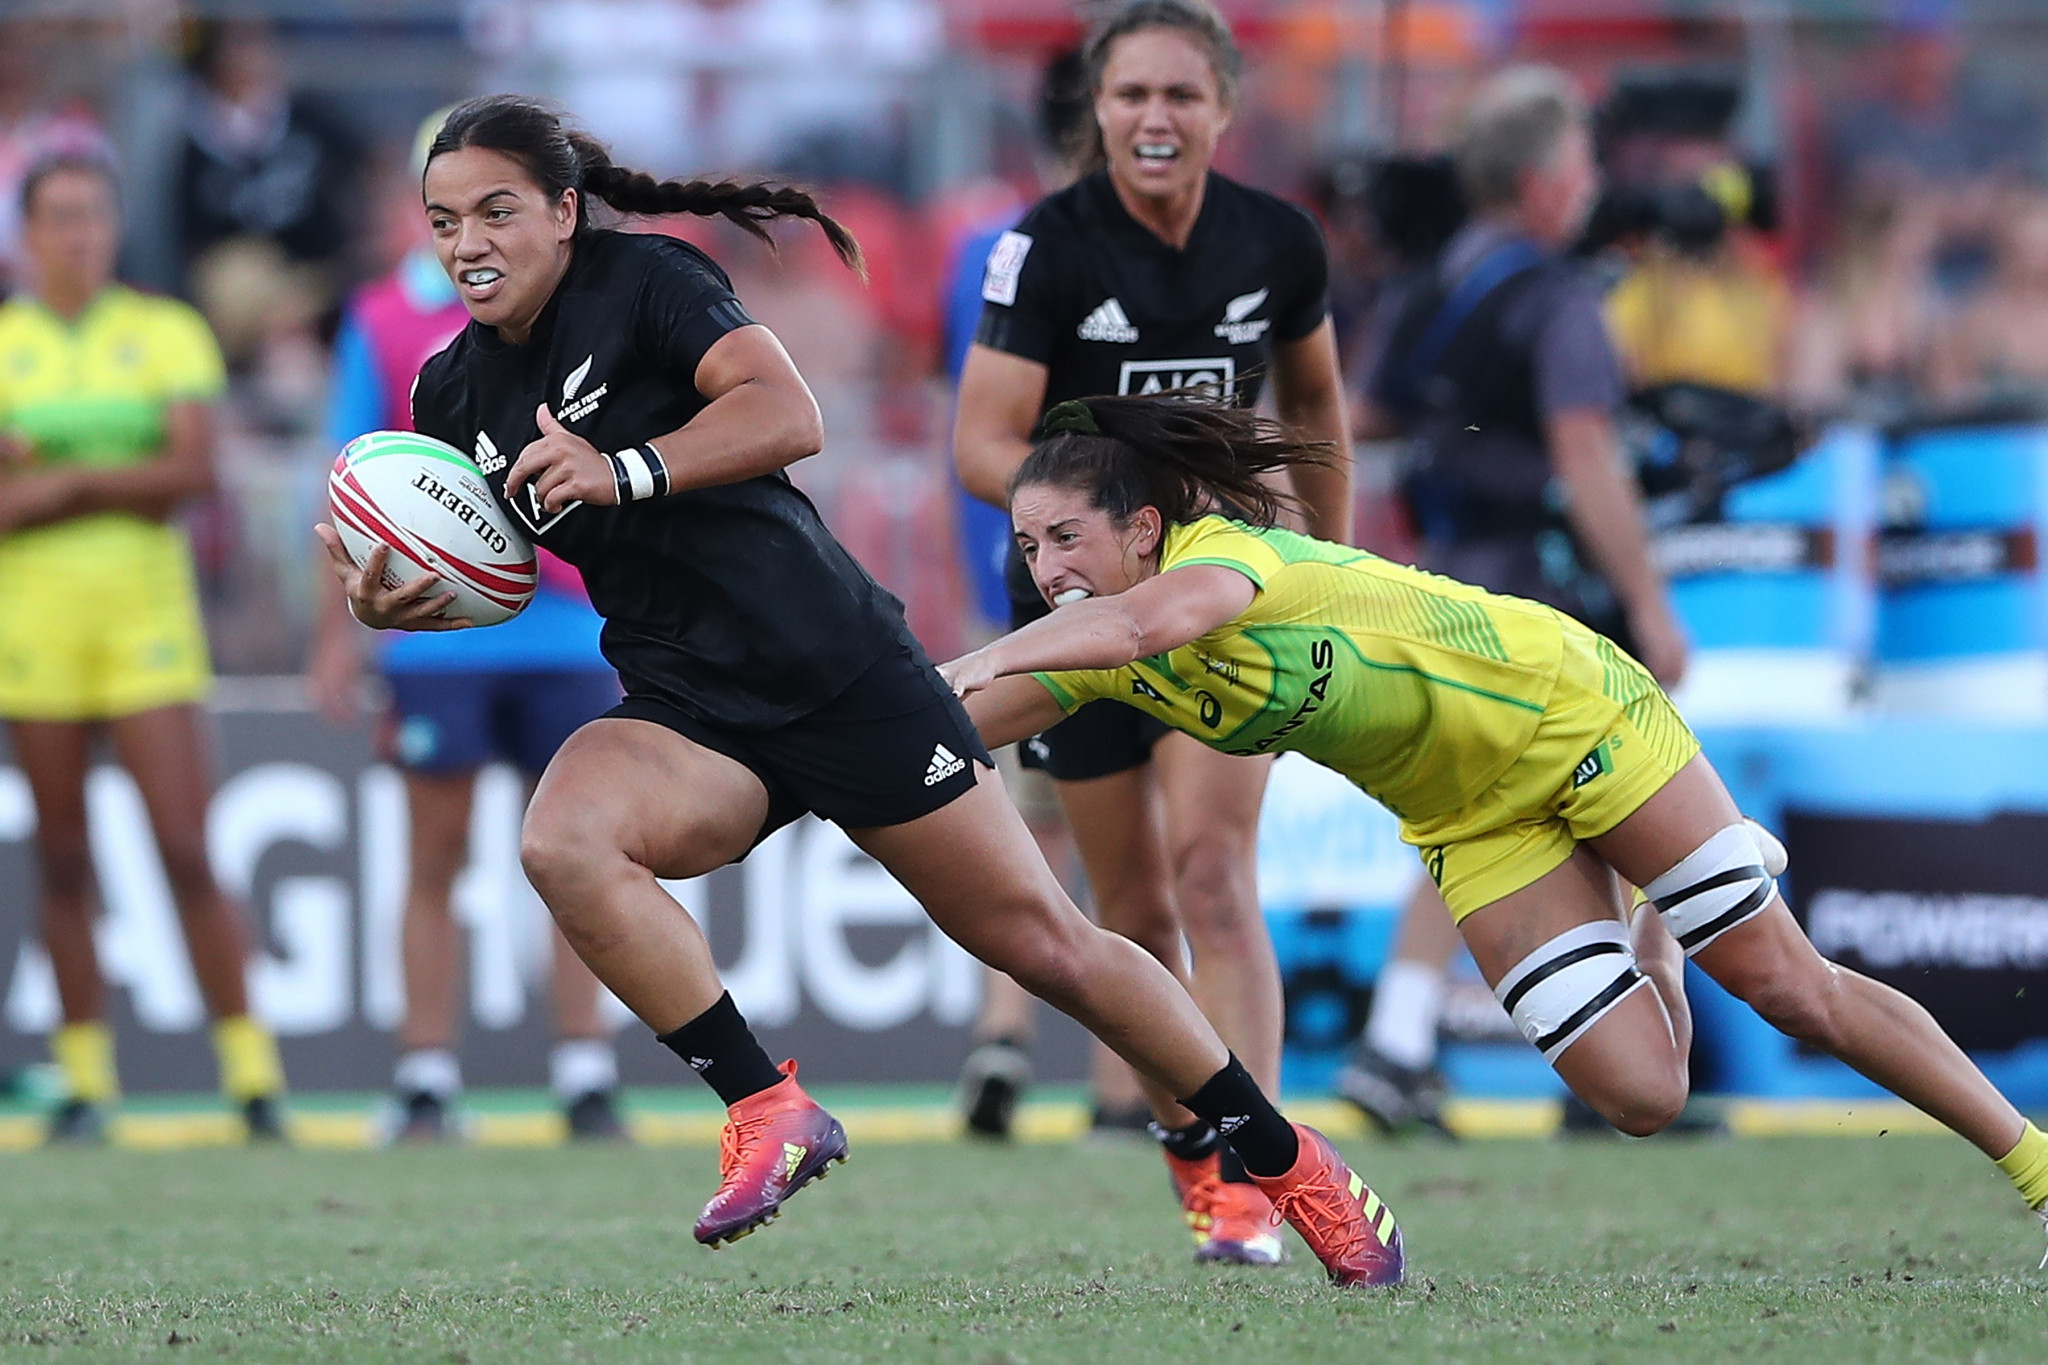 New Zealand are aiming to set a record for consecutive wins at the World Rugby Sevens Series in Kitakyushu ©World Rugby